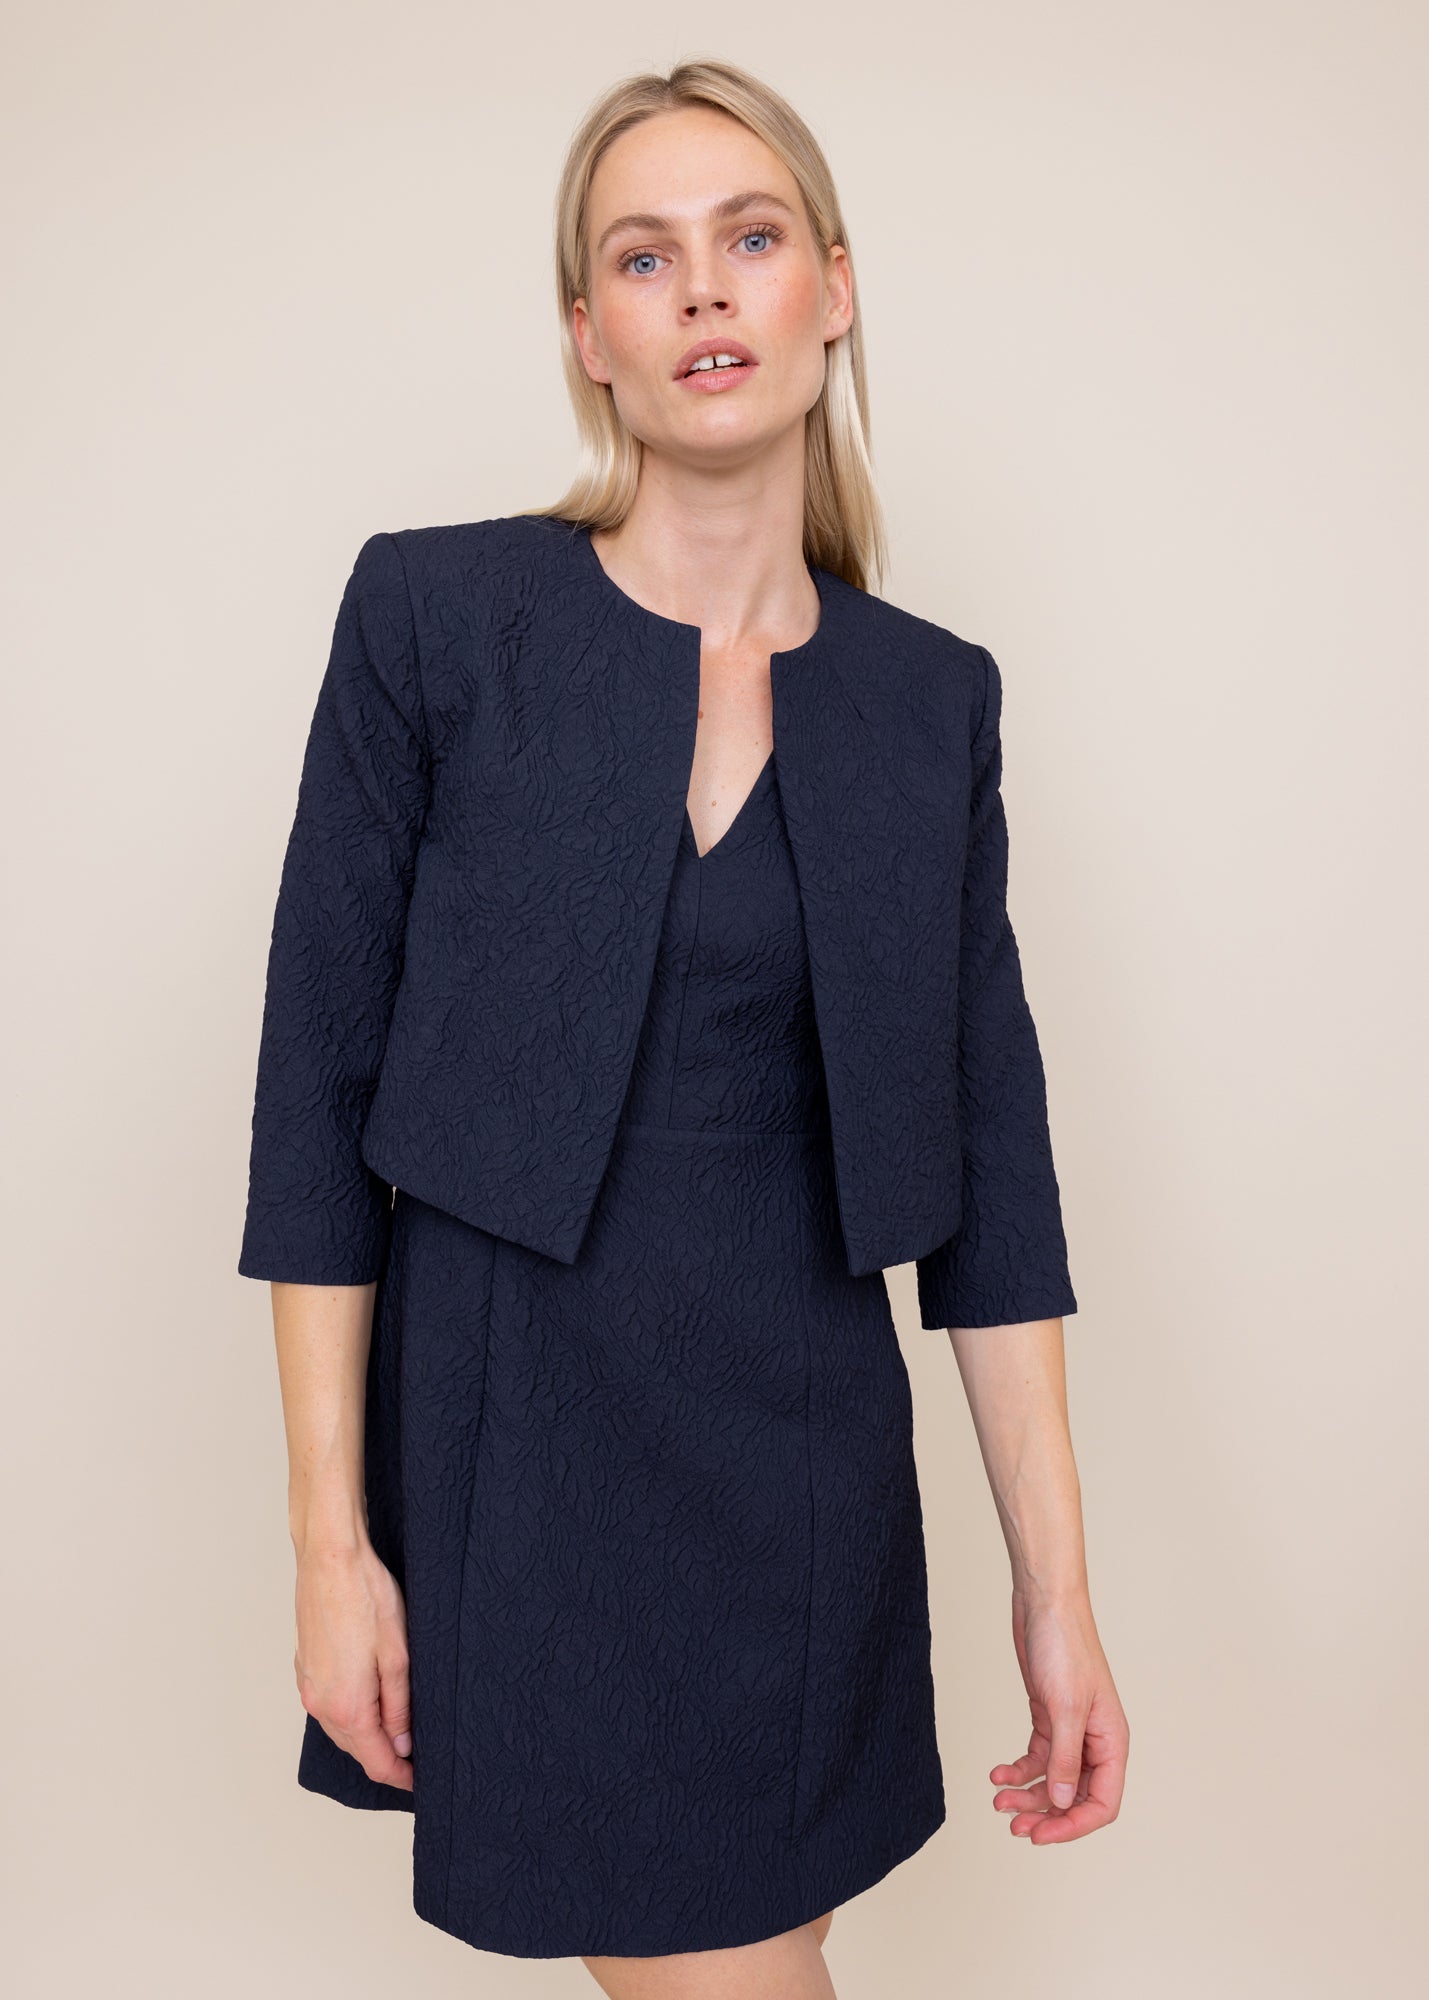 Stucture blazer cropped